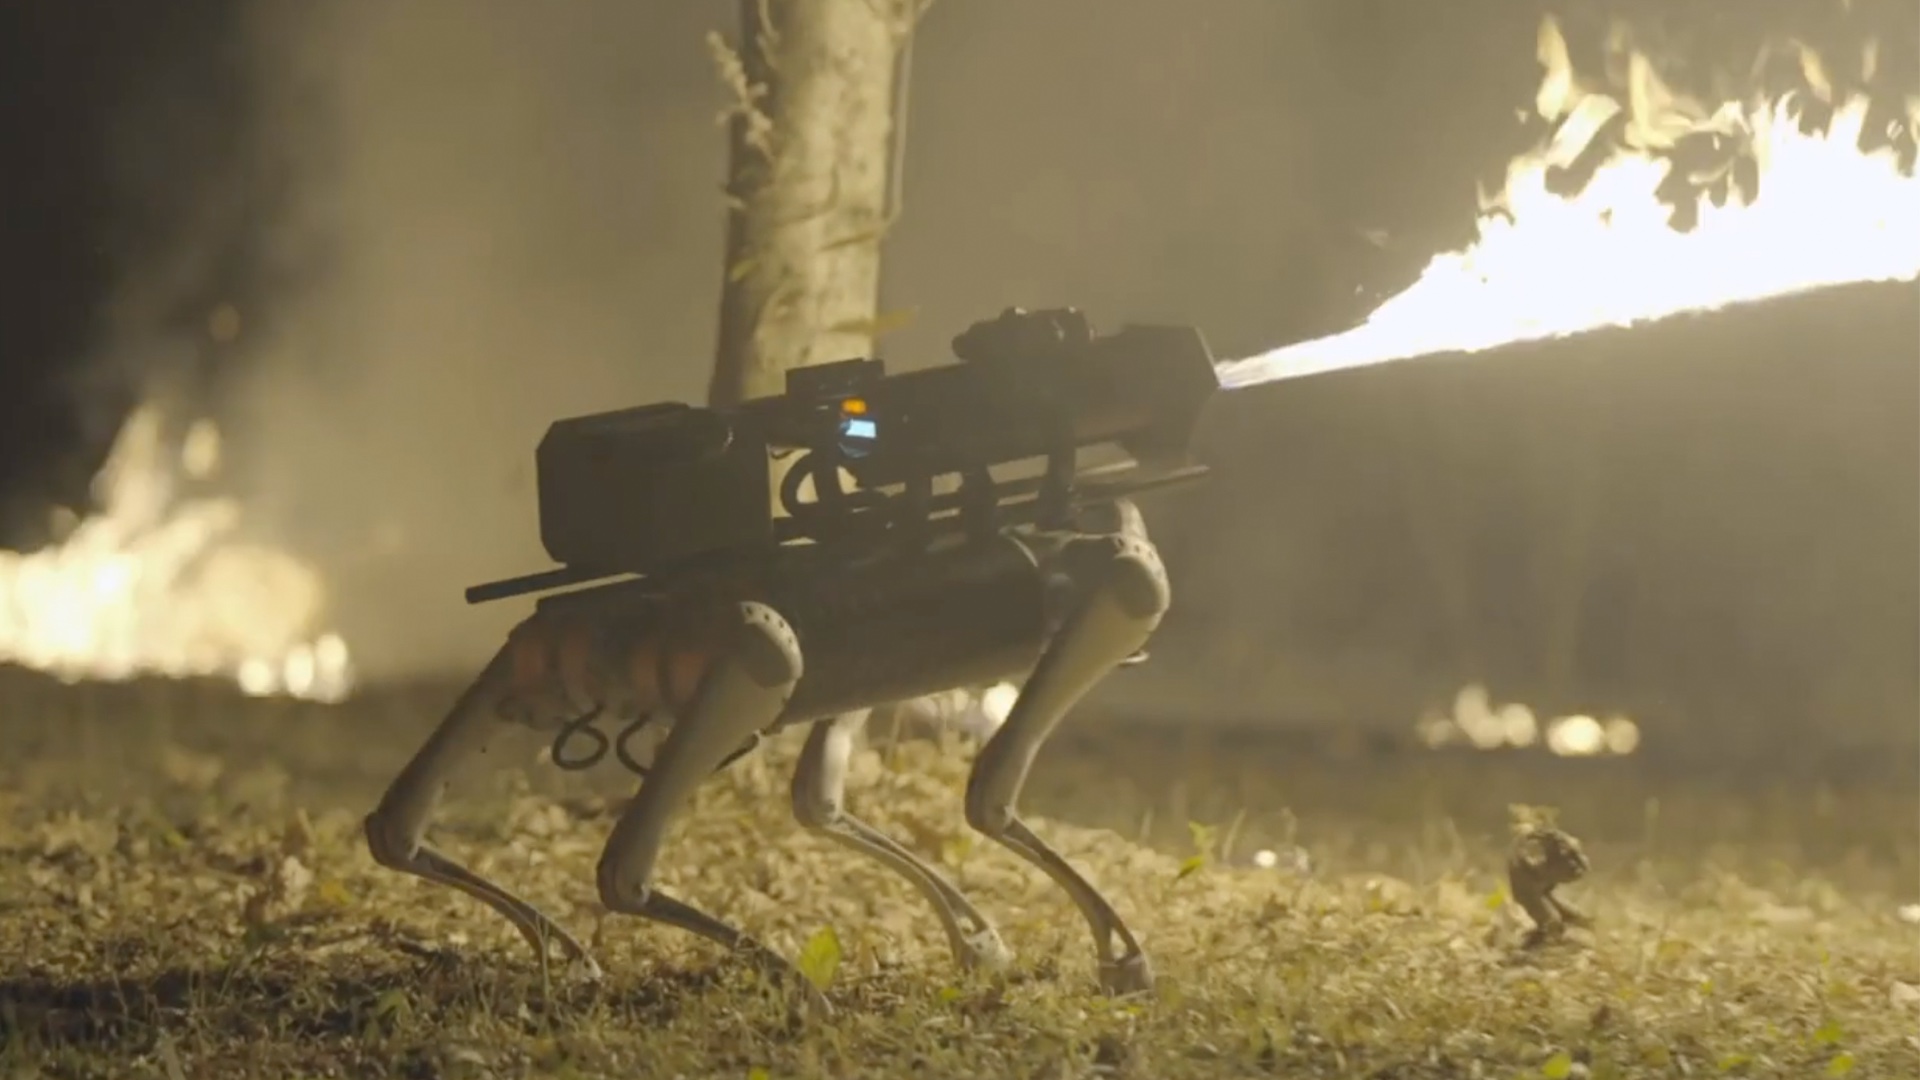 This flame-throwing robot dog is the stuff of nightmares - Task & Purpose